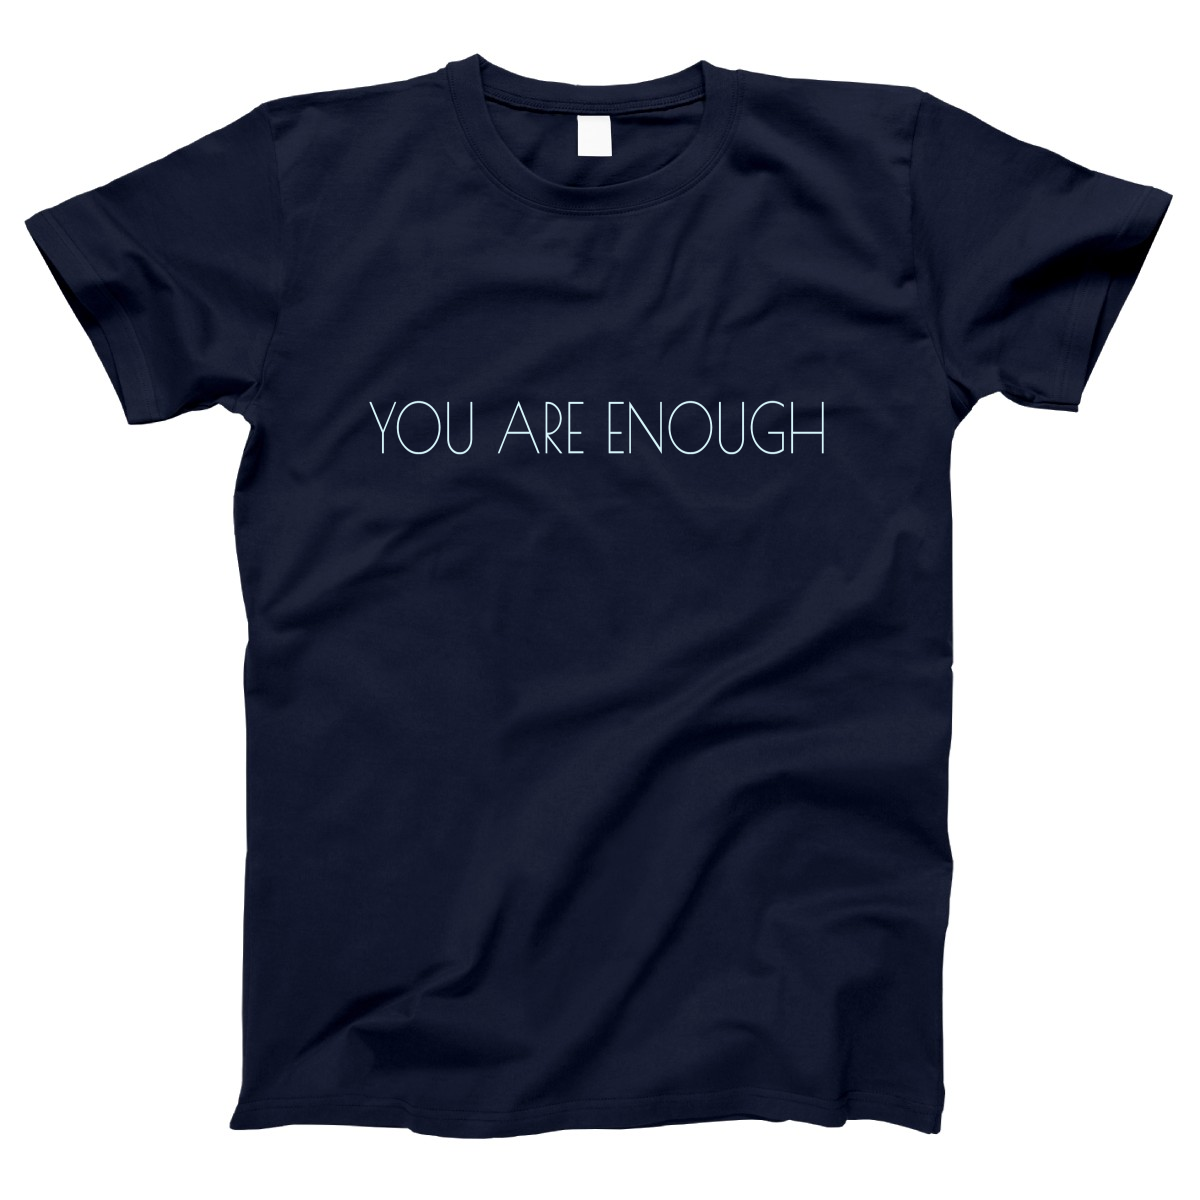 You are enough Women's T-shirt | Navy